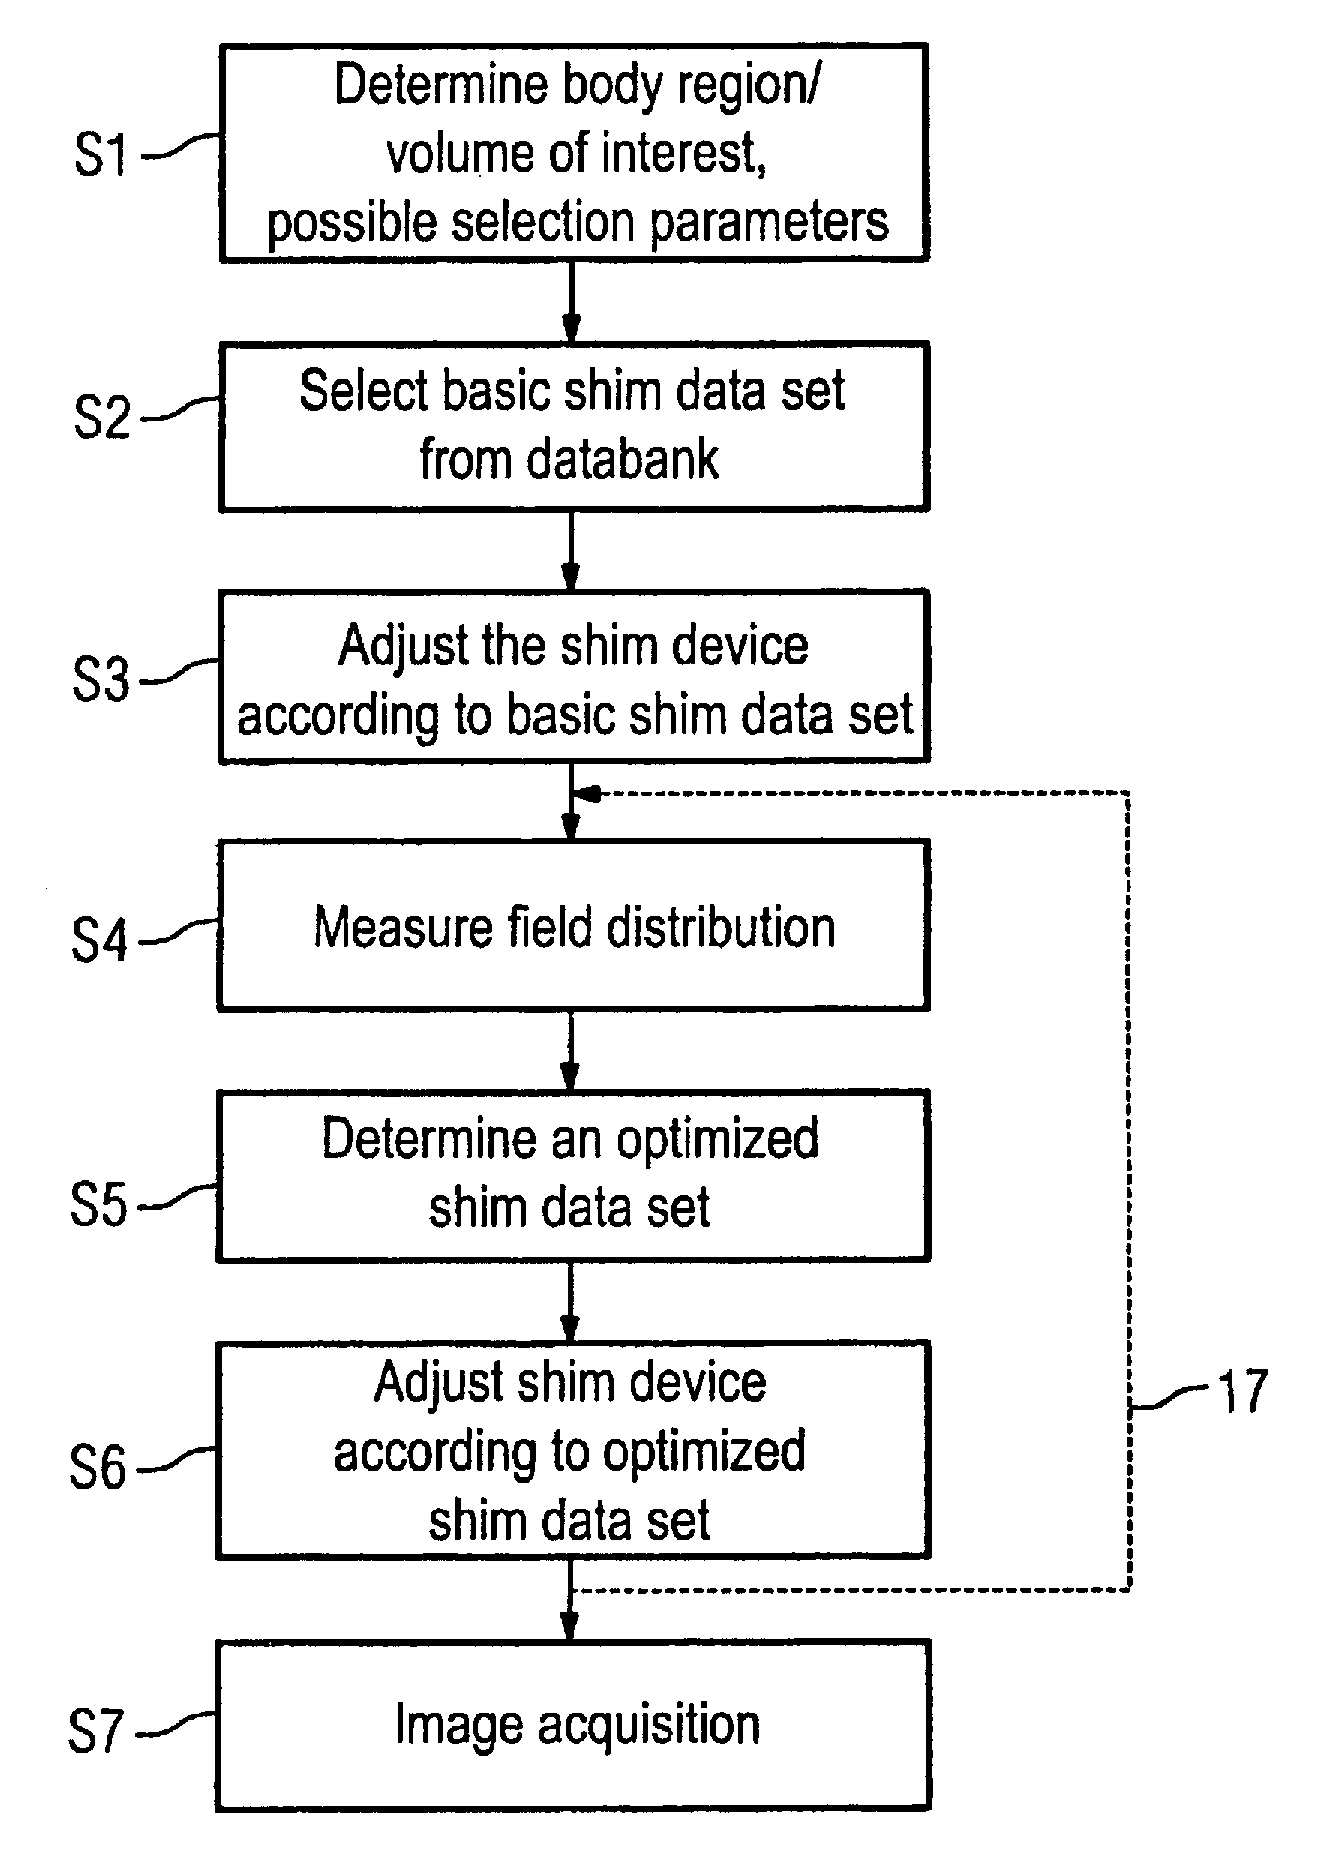 Method for adjustment of a shim device of a magnetic resonance apparatus